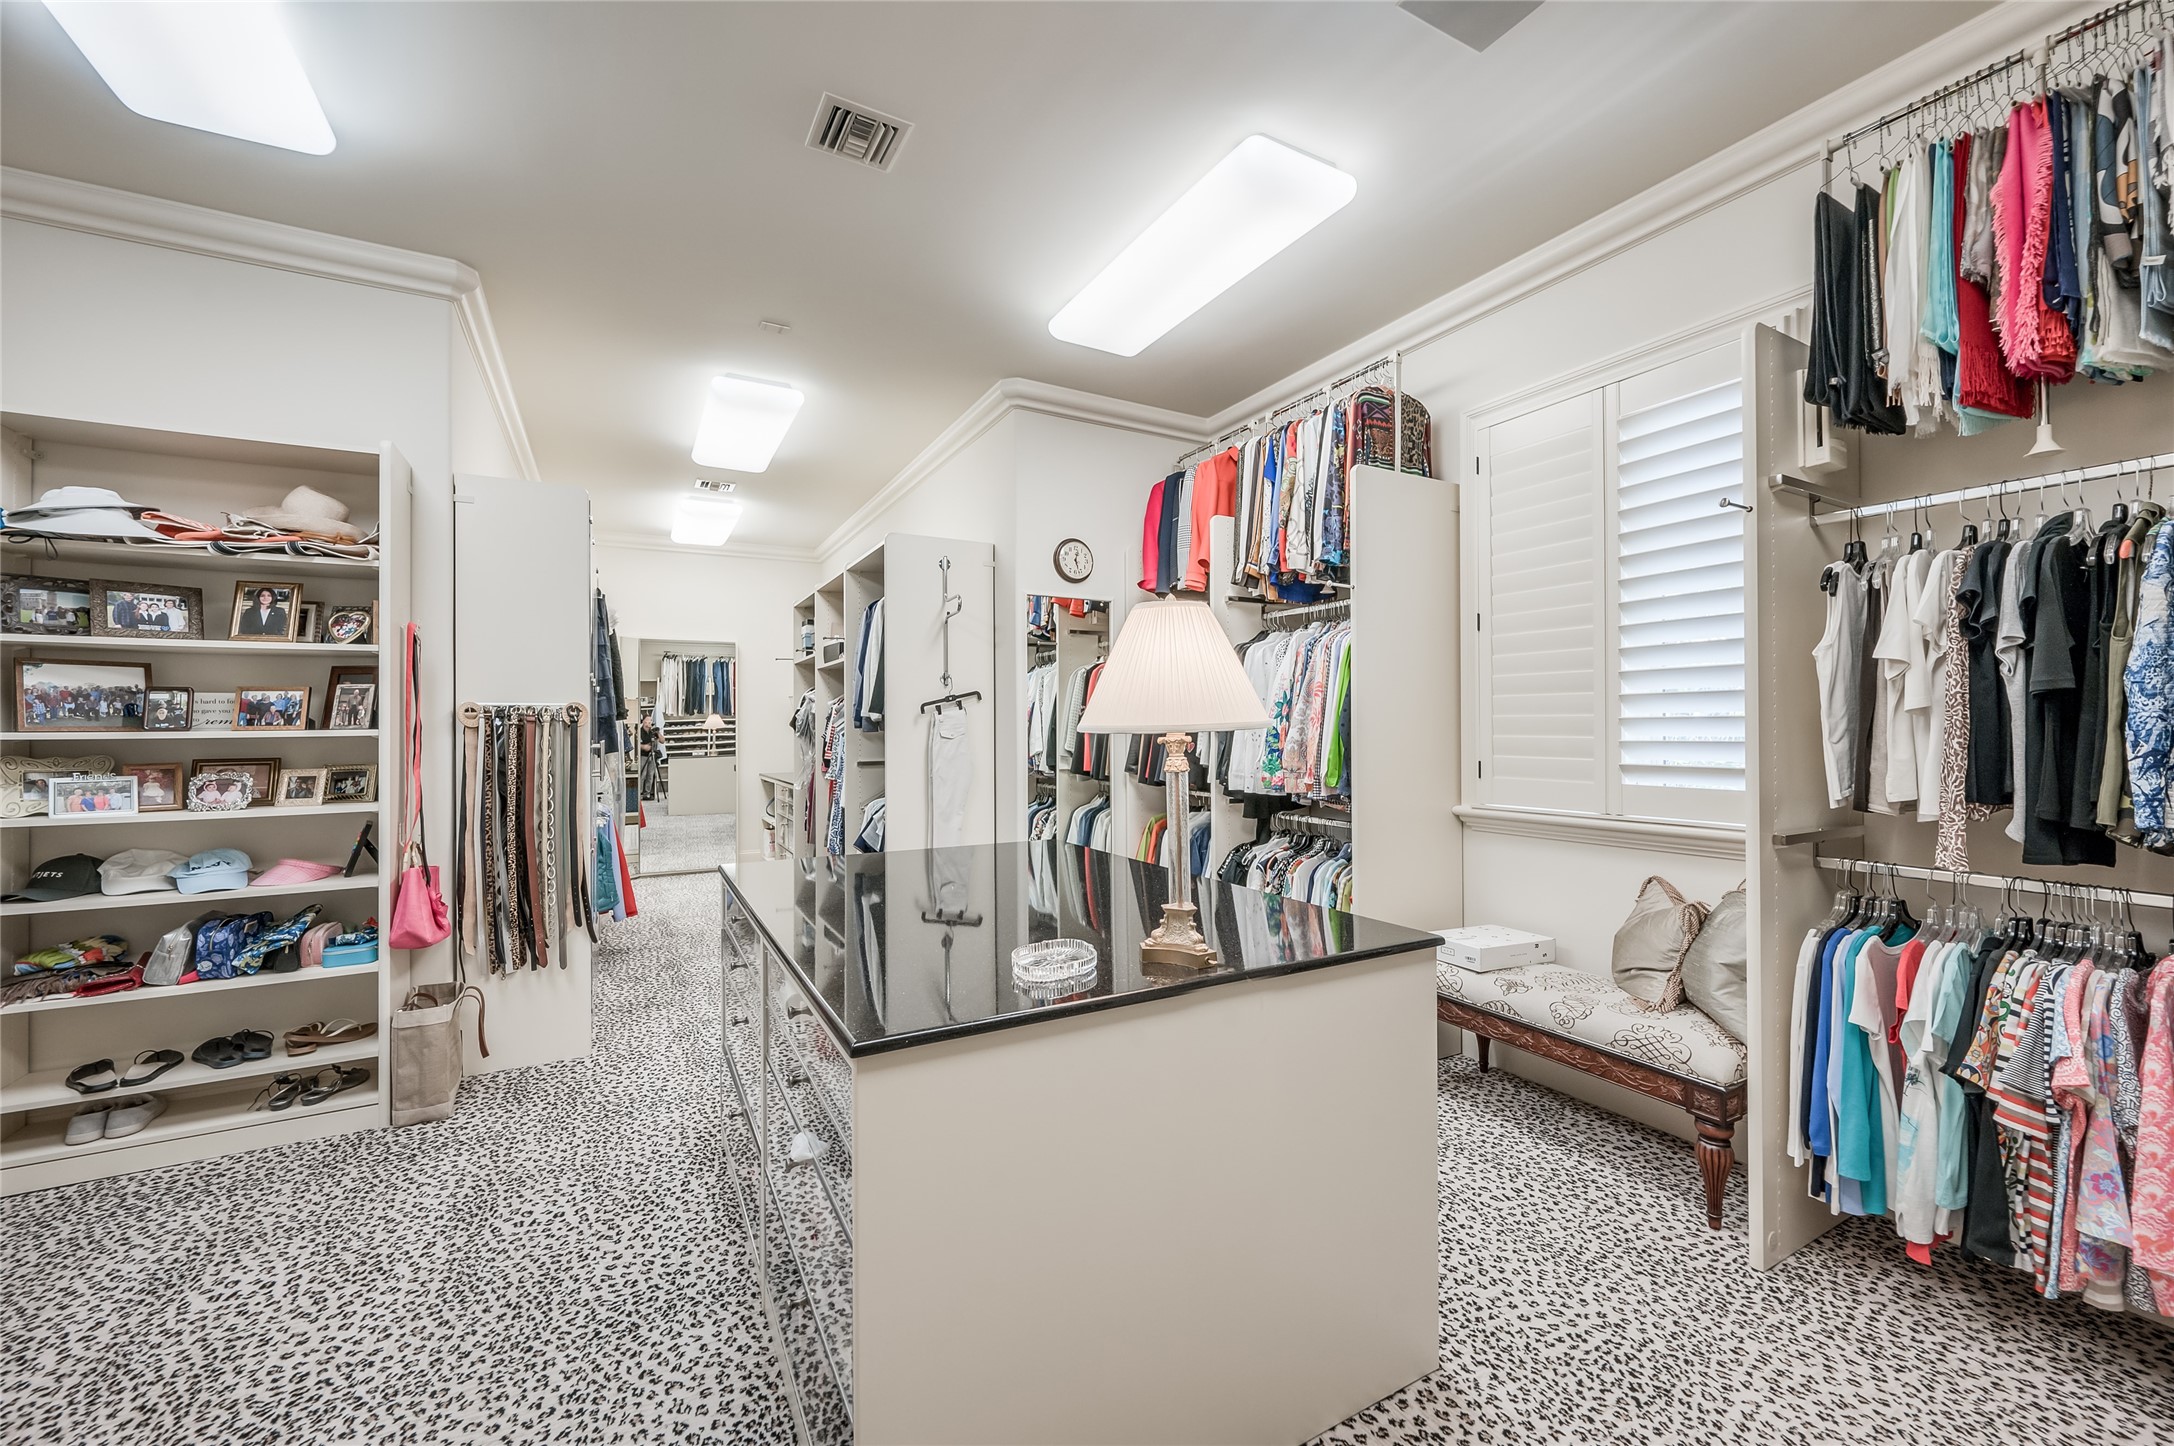 Primary Closet (1 of 2)
A pair of bespoke walk-in closets feature packing islands with drawer storage, custom mirrors, and custom-d